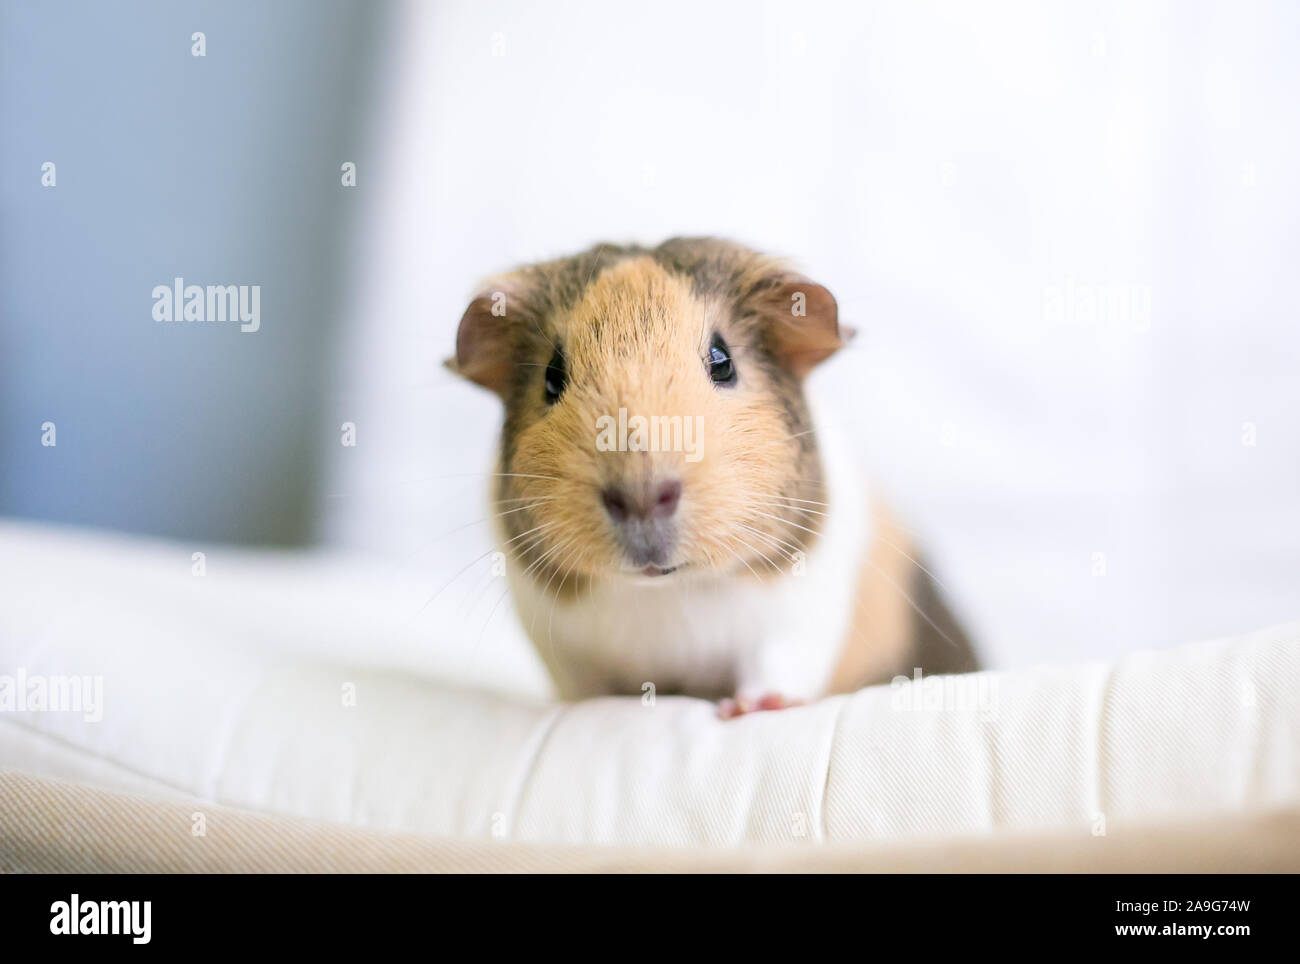 A tan and white American Guinea Pig (Cavia porcellus) looking at the camera Stock Photo